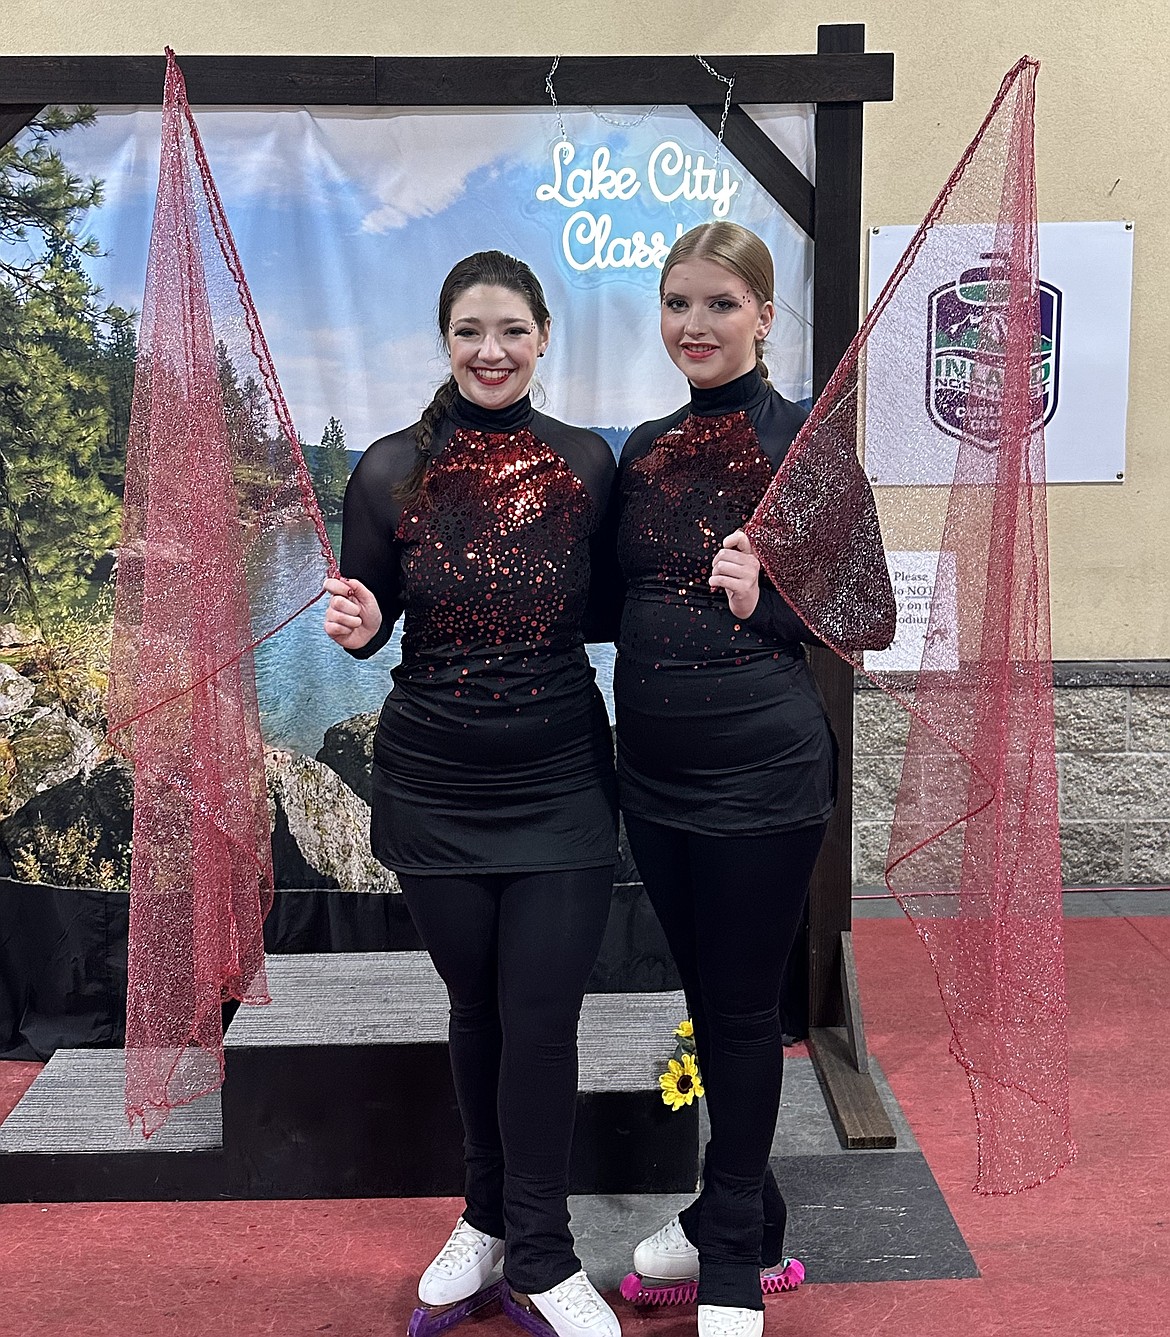 Courtesy photo 
Margaret Nieman, left, and Meg Conlon, part of the Lake City Figure Skating program of the Spokane Figure Skating Club, which hosted the Lake City Classic on May 17-19 at the Frontier Ice Arena in Coeur d'Alene.